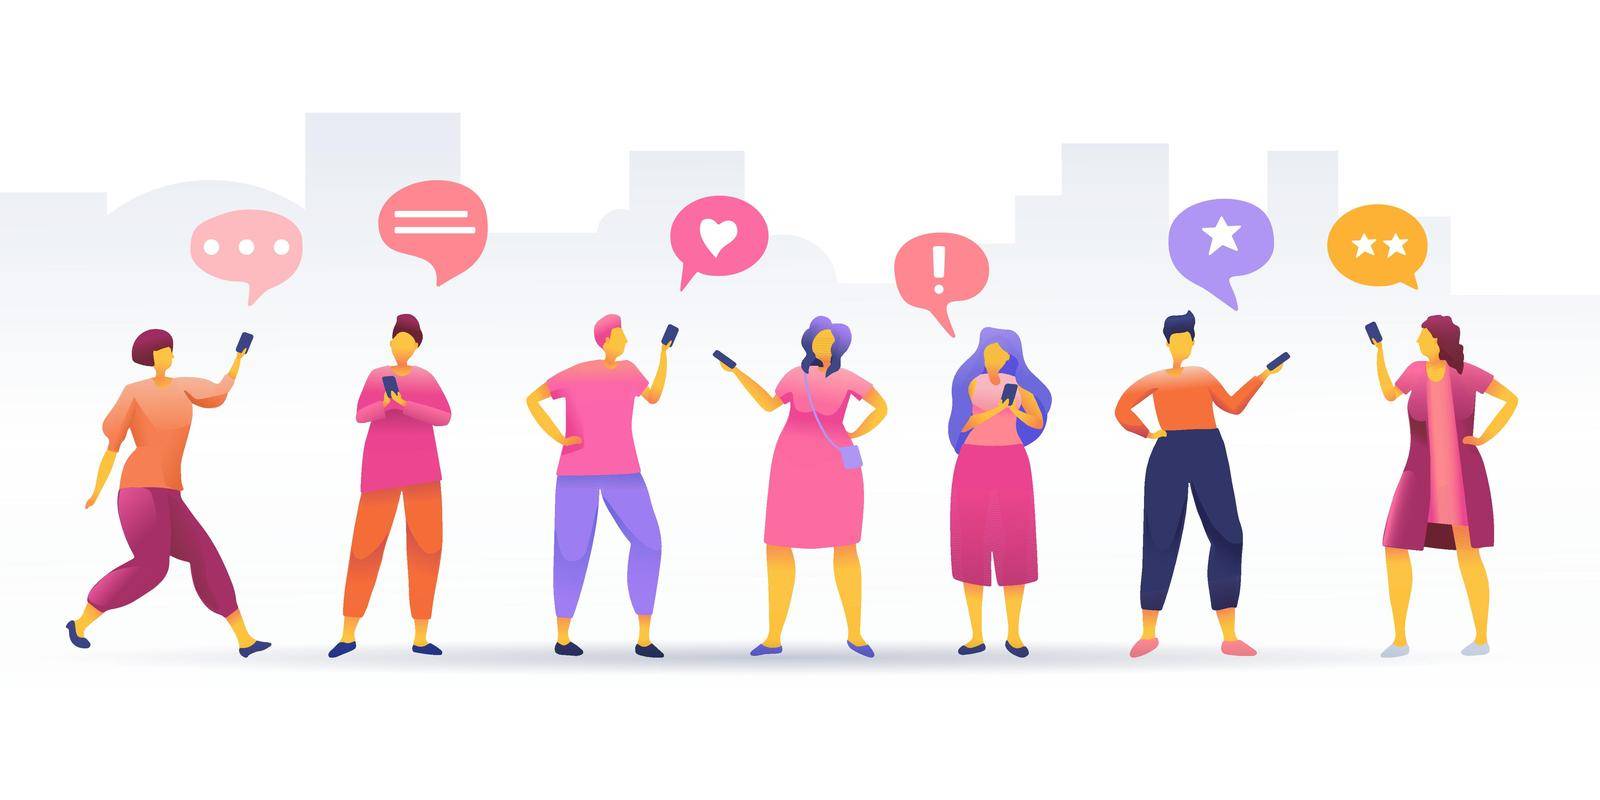 Social Network, stay connected, people connecting all over the world, Young People Characters Chatting, online community, for web page, banner, presentation, social media, vector illustration.